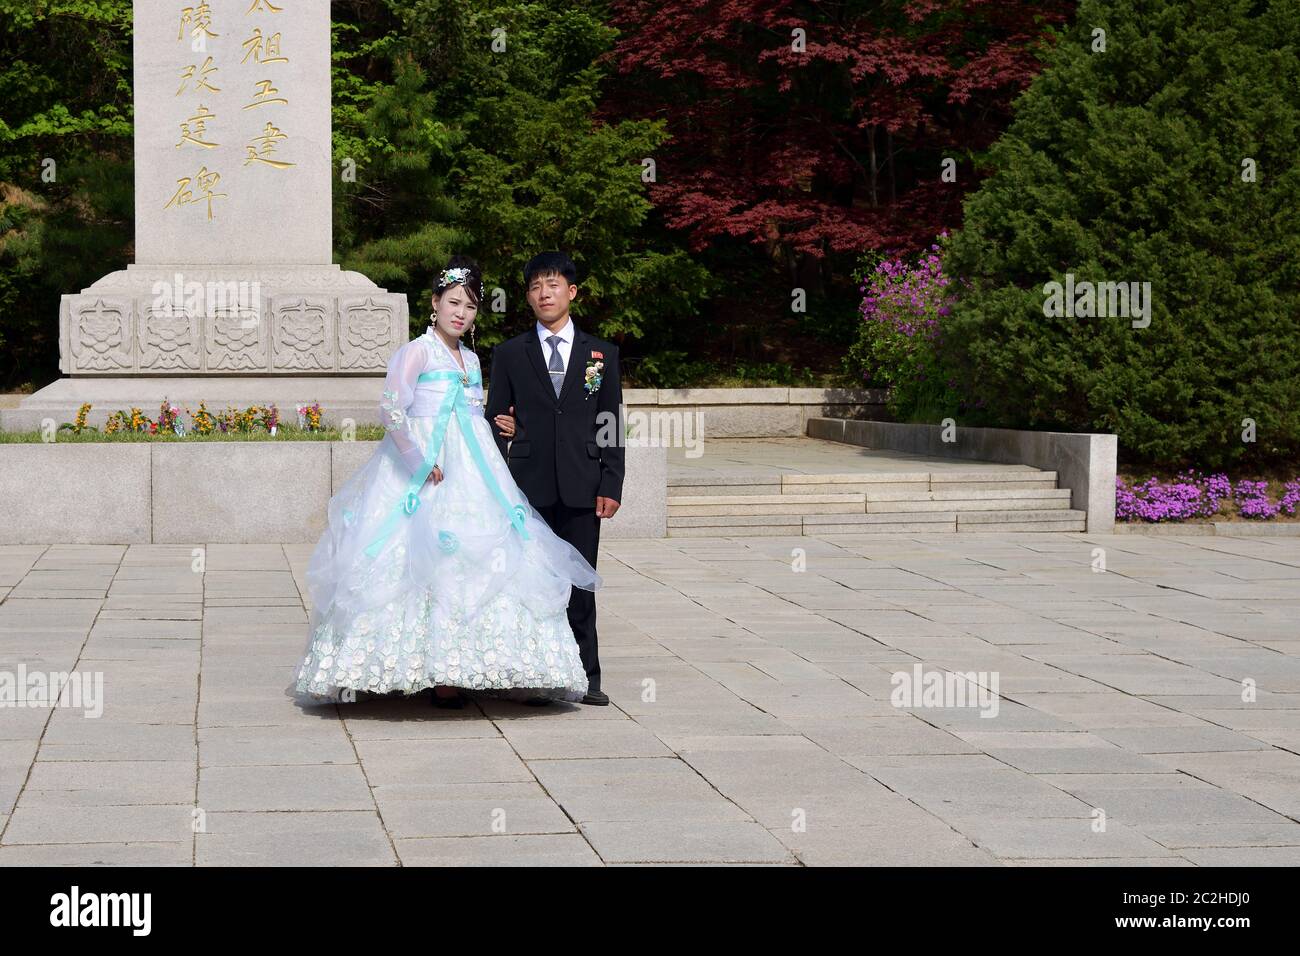 Kaesong, North Korea - May 5, 2019: Young Korean couple in historical place - Tomb of King Wanggon. Newlyweds are photographed against the background Stock Photo